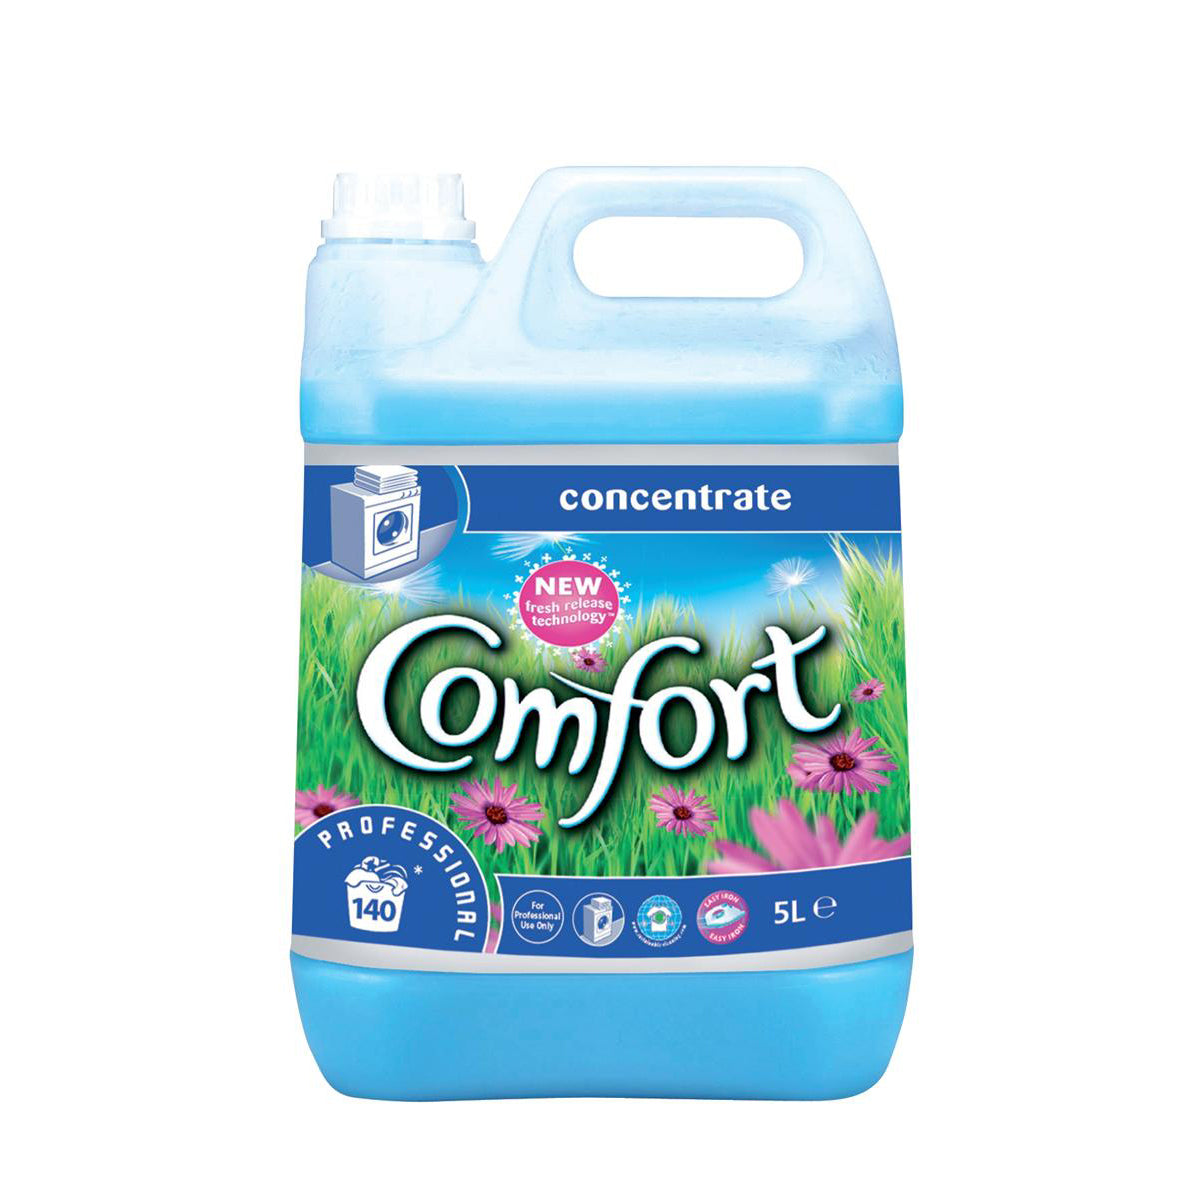 COMFORT PROFESSIONAL CONCENTRATED FABRIC SOFTENER (5L)